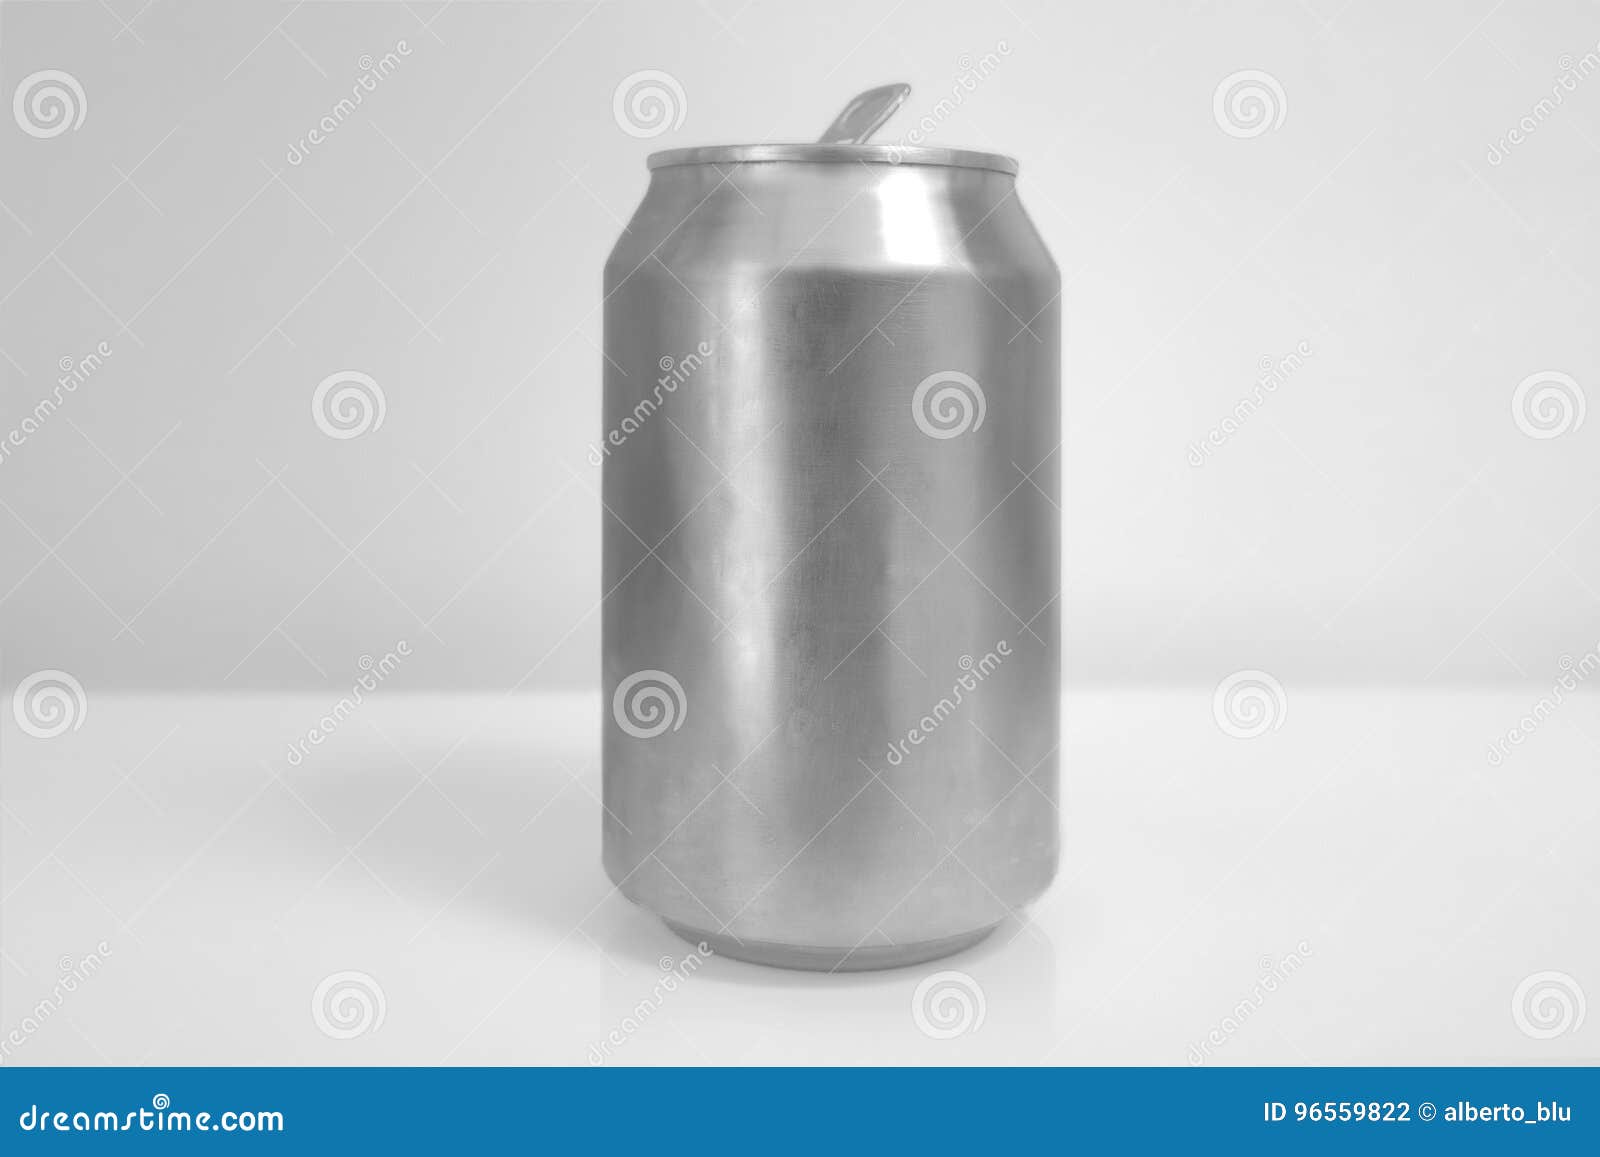 aluminum soda can over white background